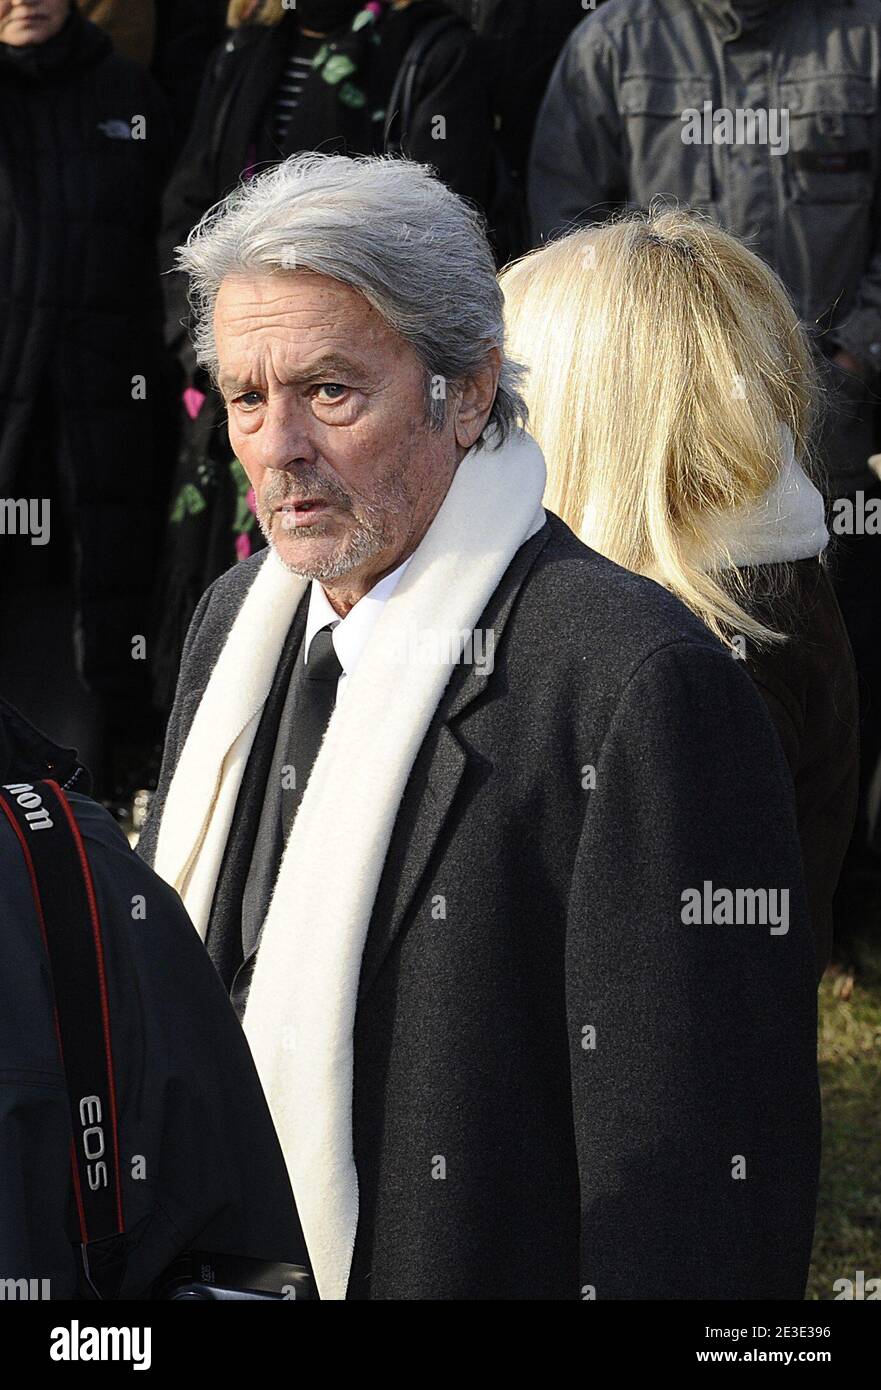 Alain Delon and Mireille Darc attending the funeral ceremony of French  producer, director and actor Claude Berri at Bagneux cemetery's jewish  district near Paris, France on January 15, 2009. Claude Berri, a